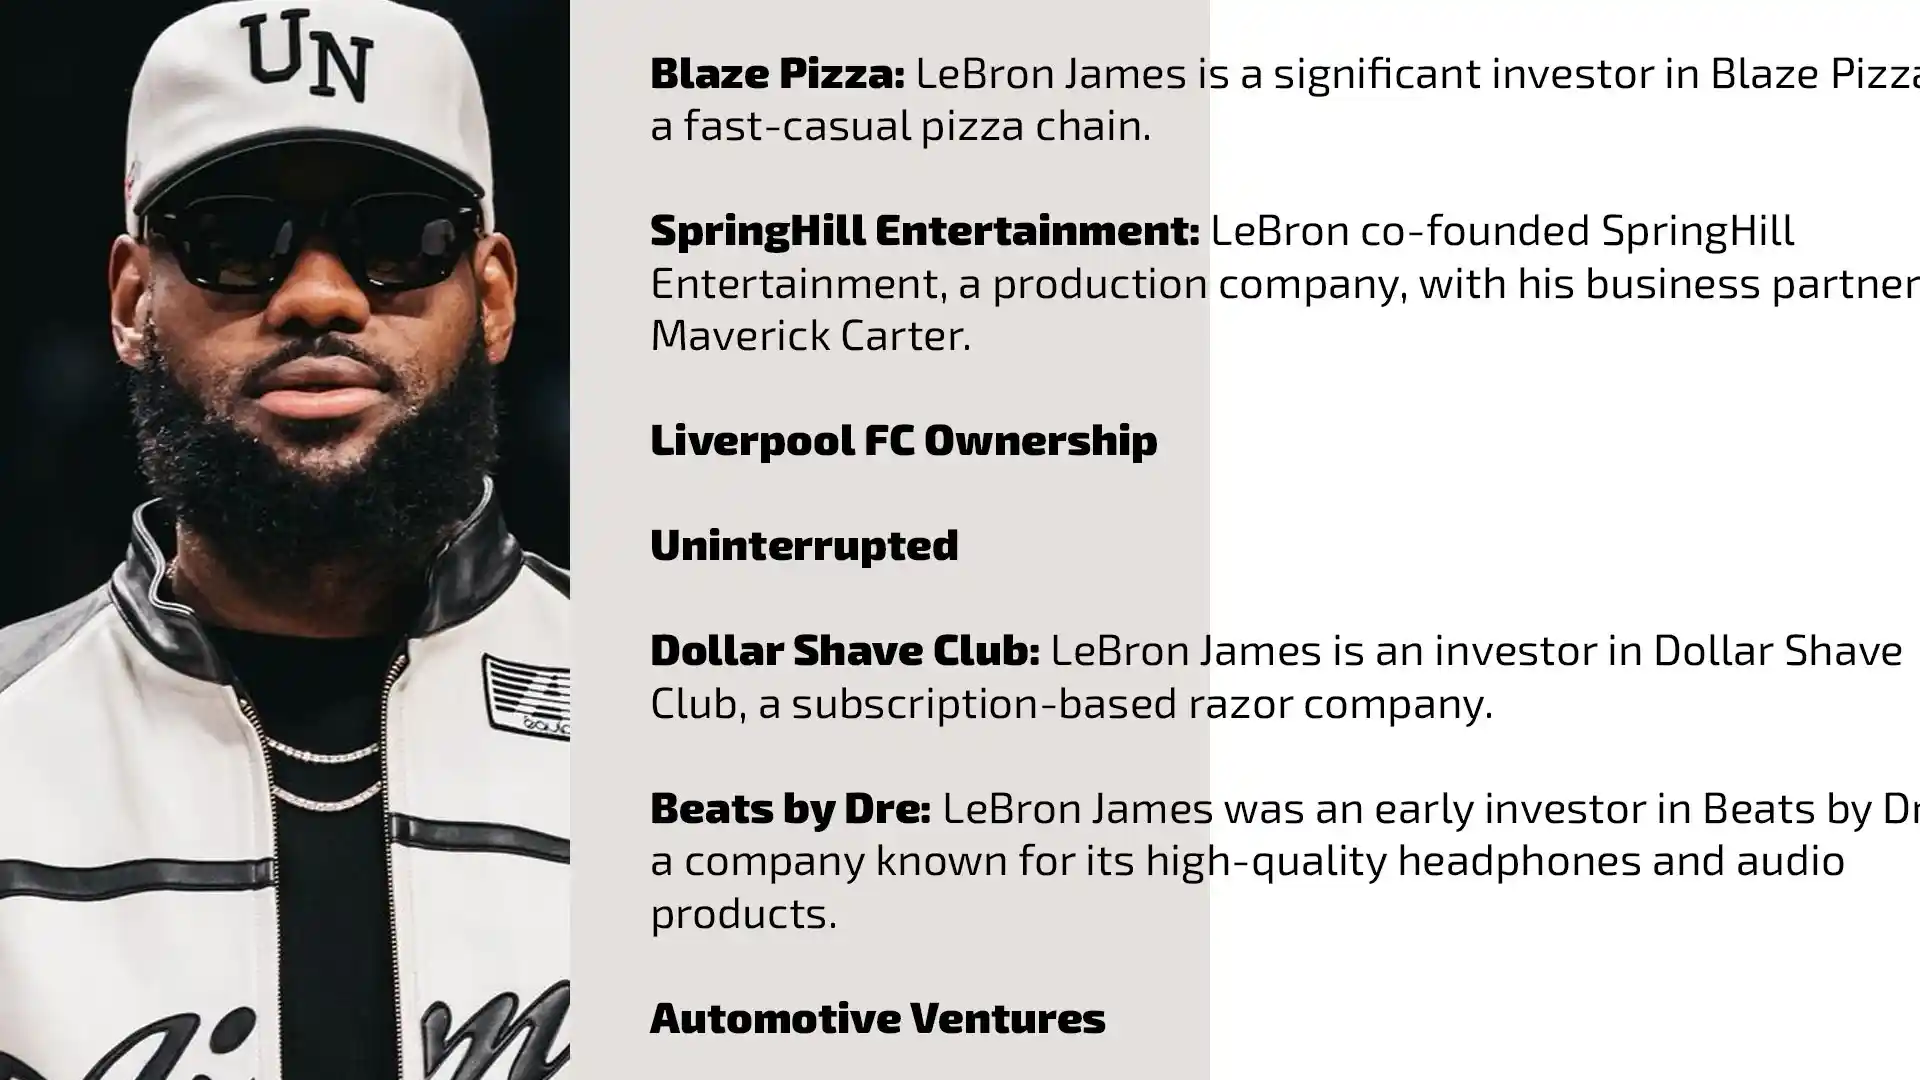 LeBron James investments